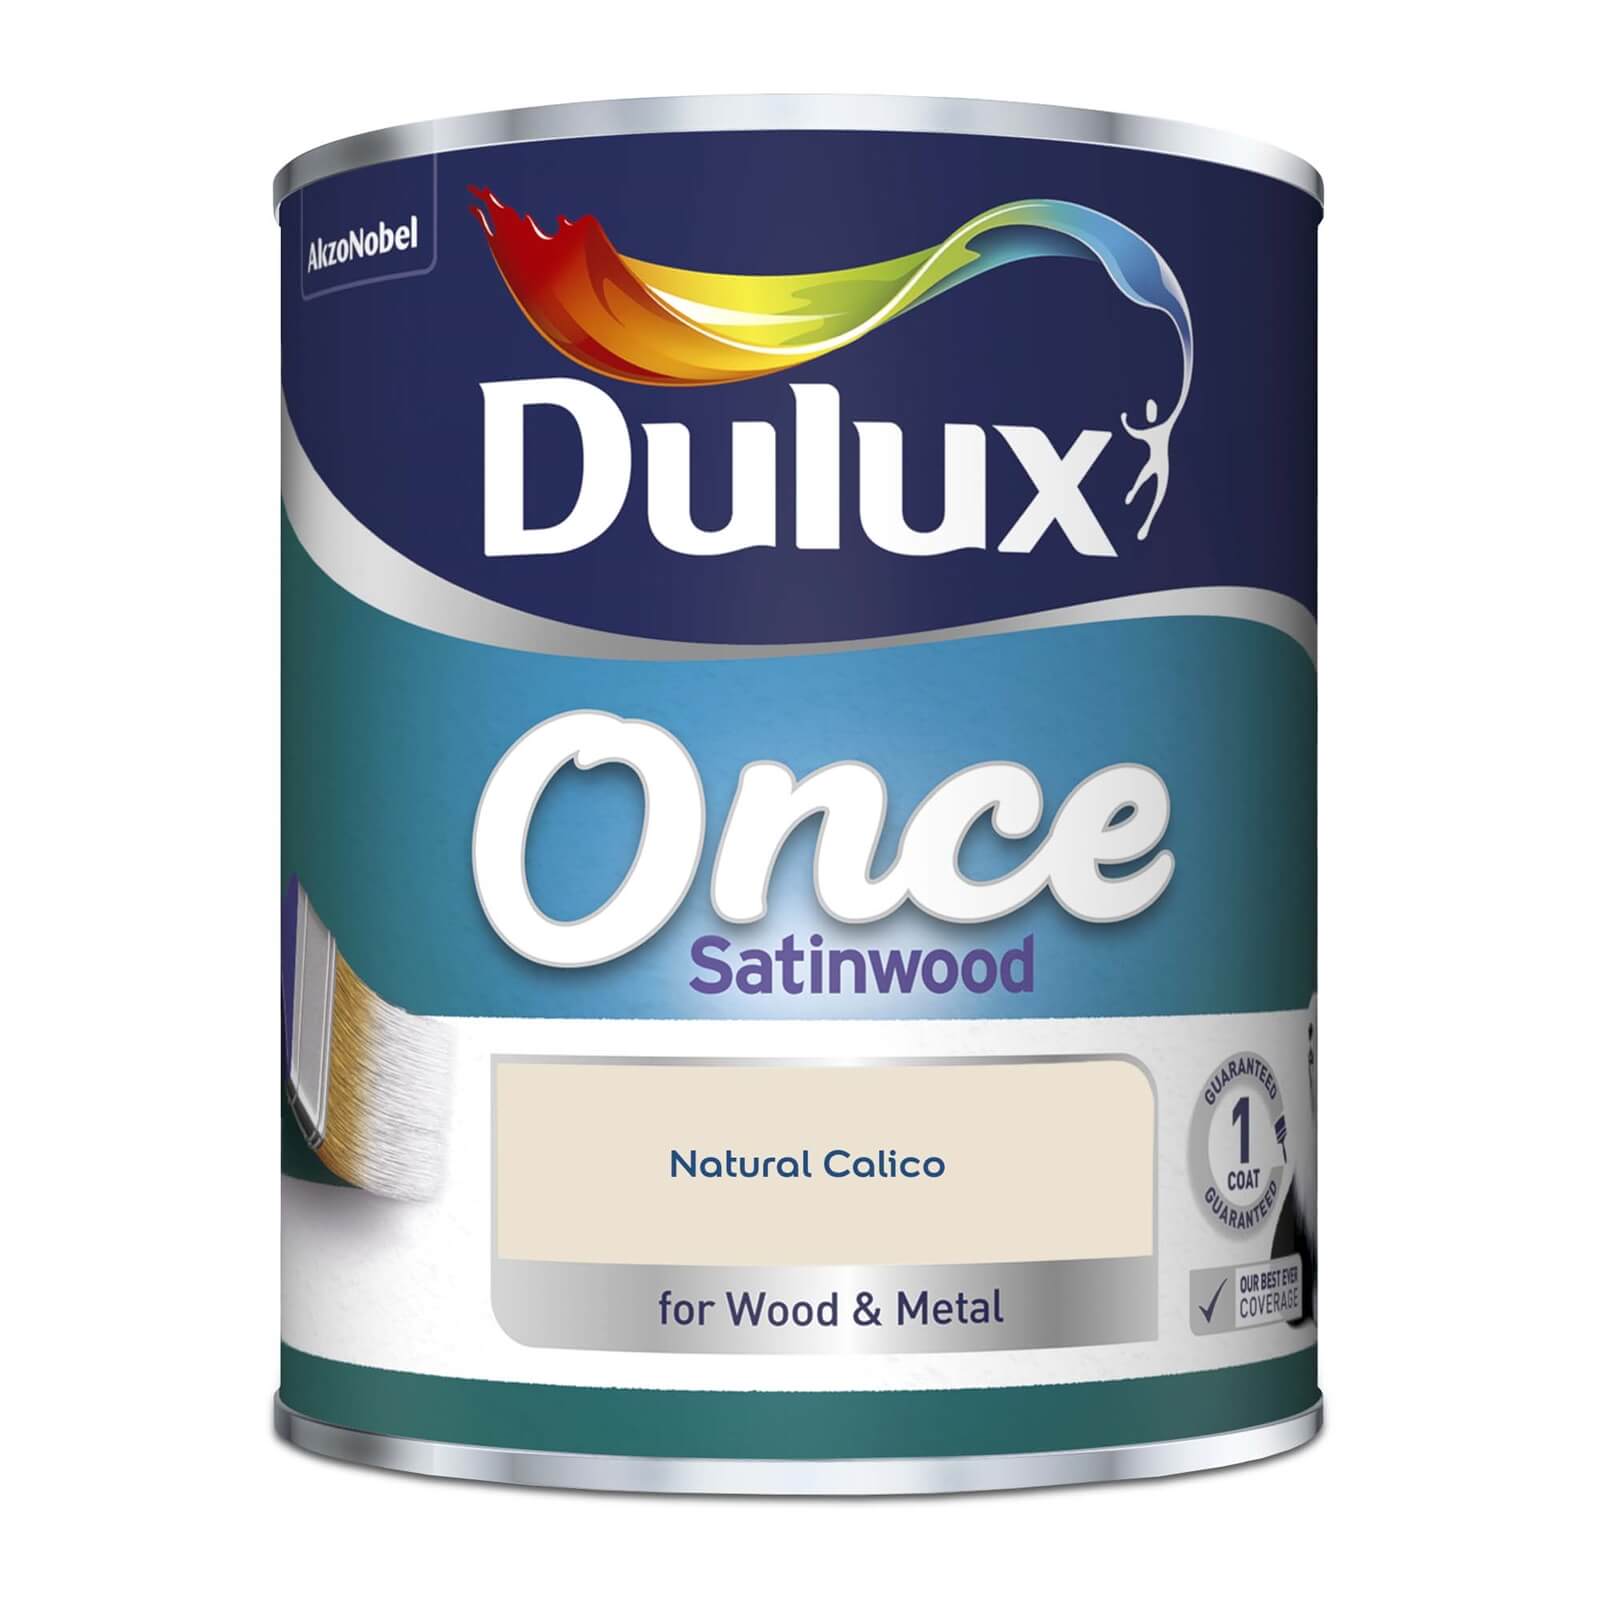 Dulux Once Satinwood Paint Natural Calico - 750ml